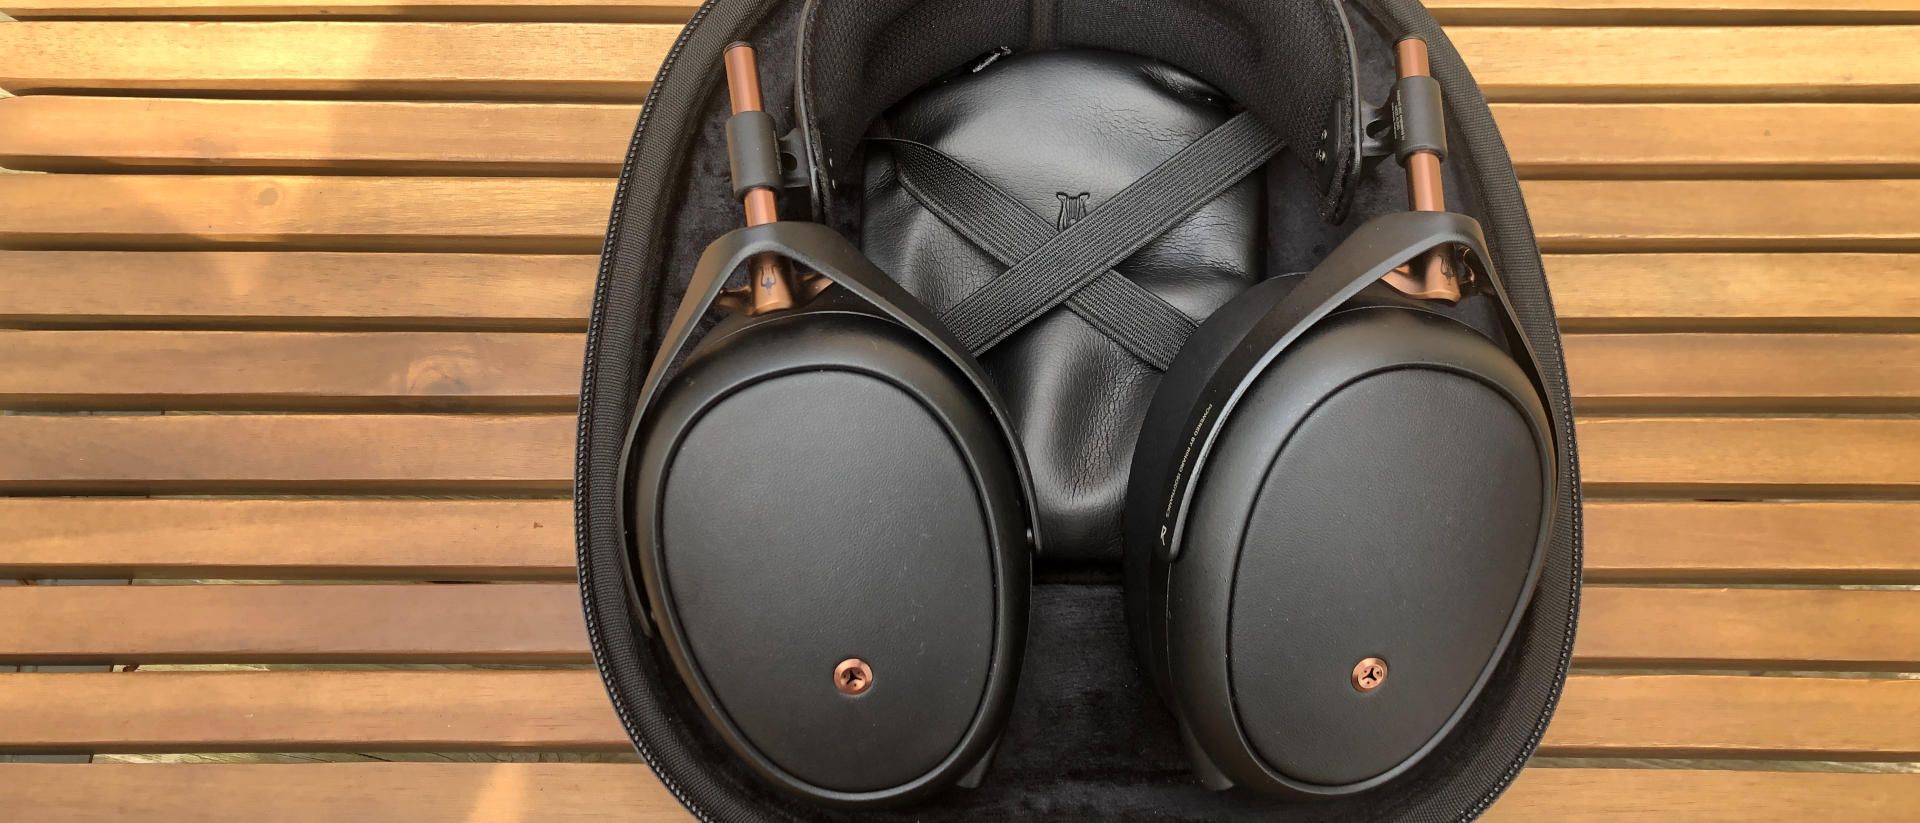 Meze Audio Liric review: the most detailed wired headphones around